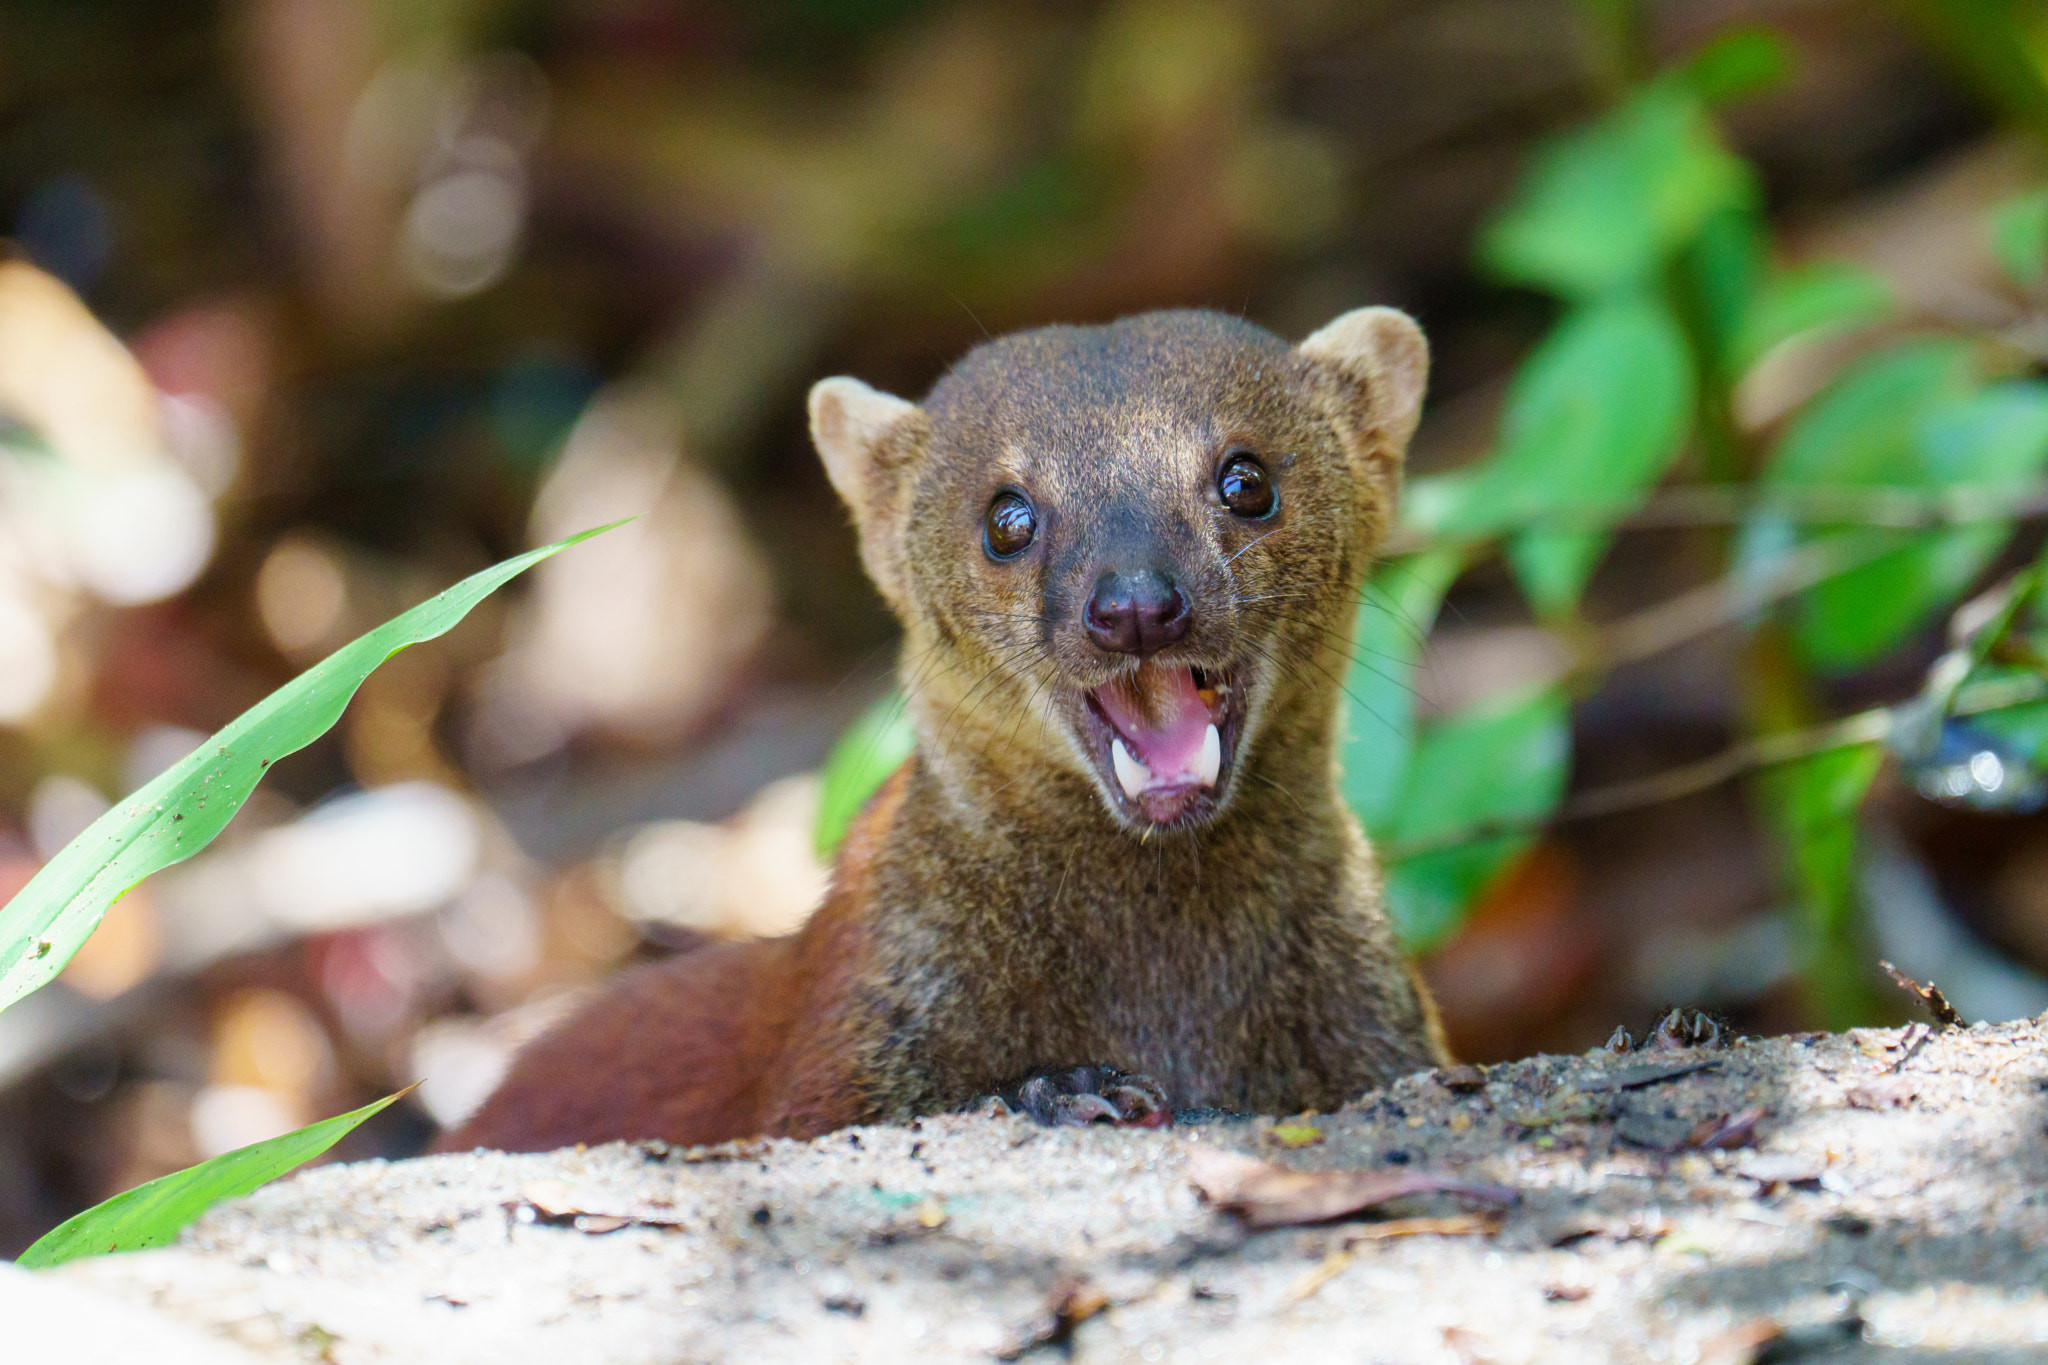 Sony a6300 sample photo. Weasel like creature in rainforest of madagascar photography